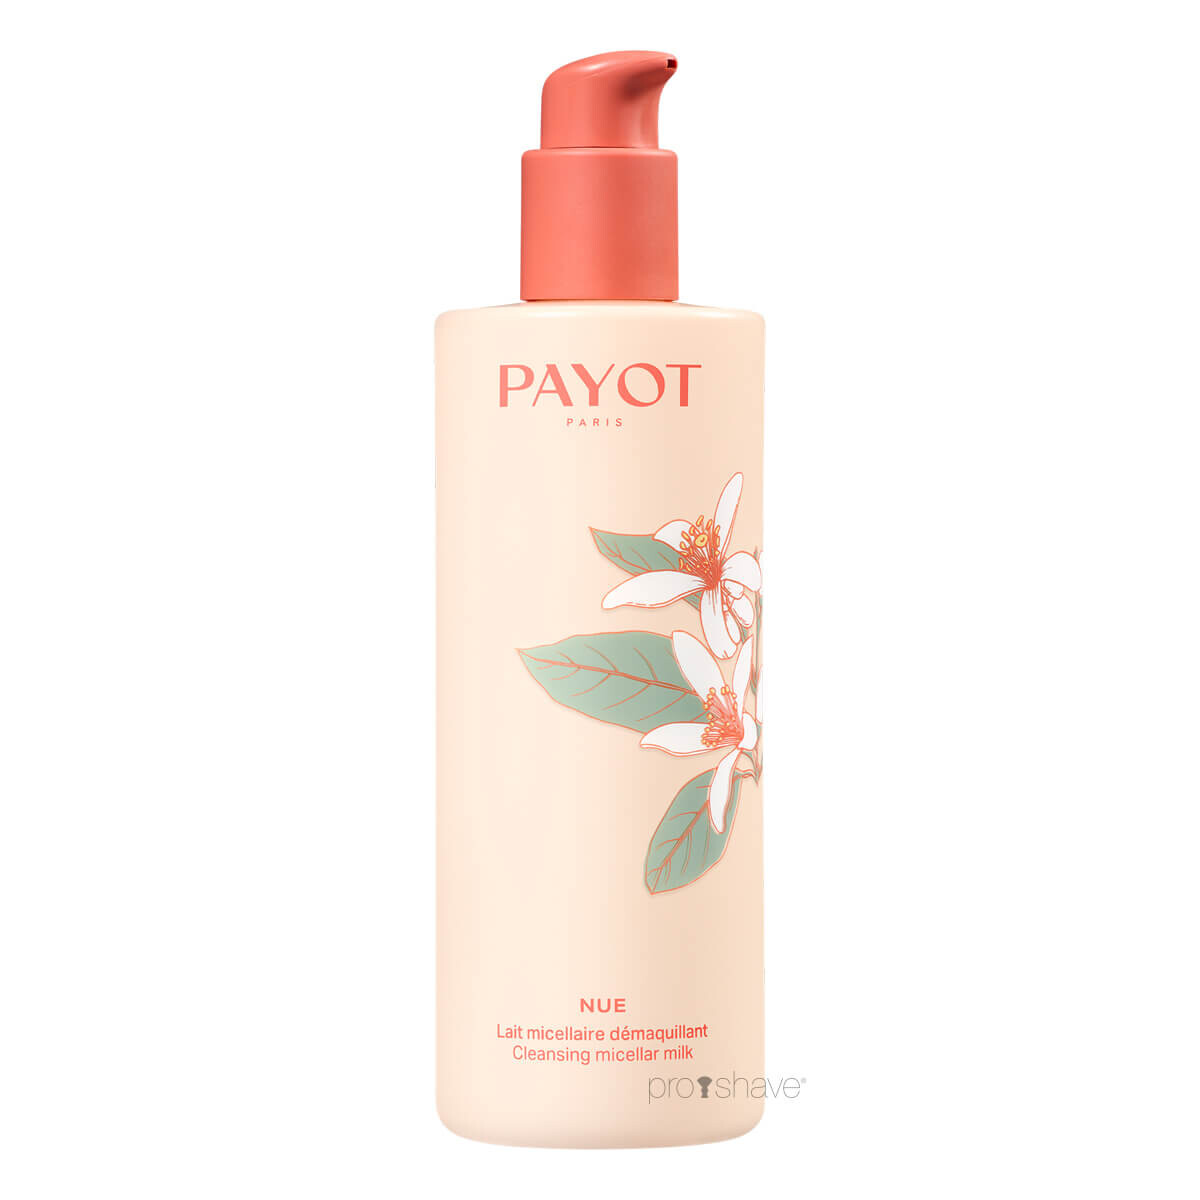 Se Payot Nue Micellaire Cleansing Milk, 400 ml. hos Proshave